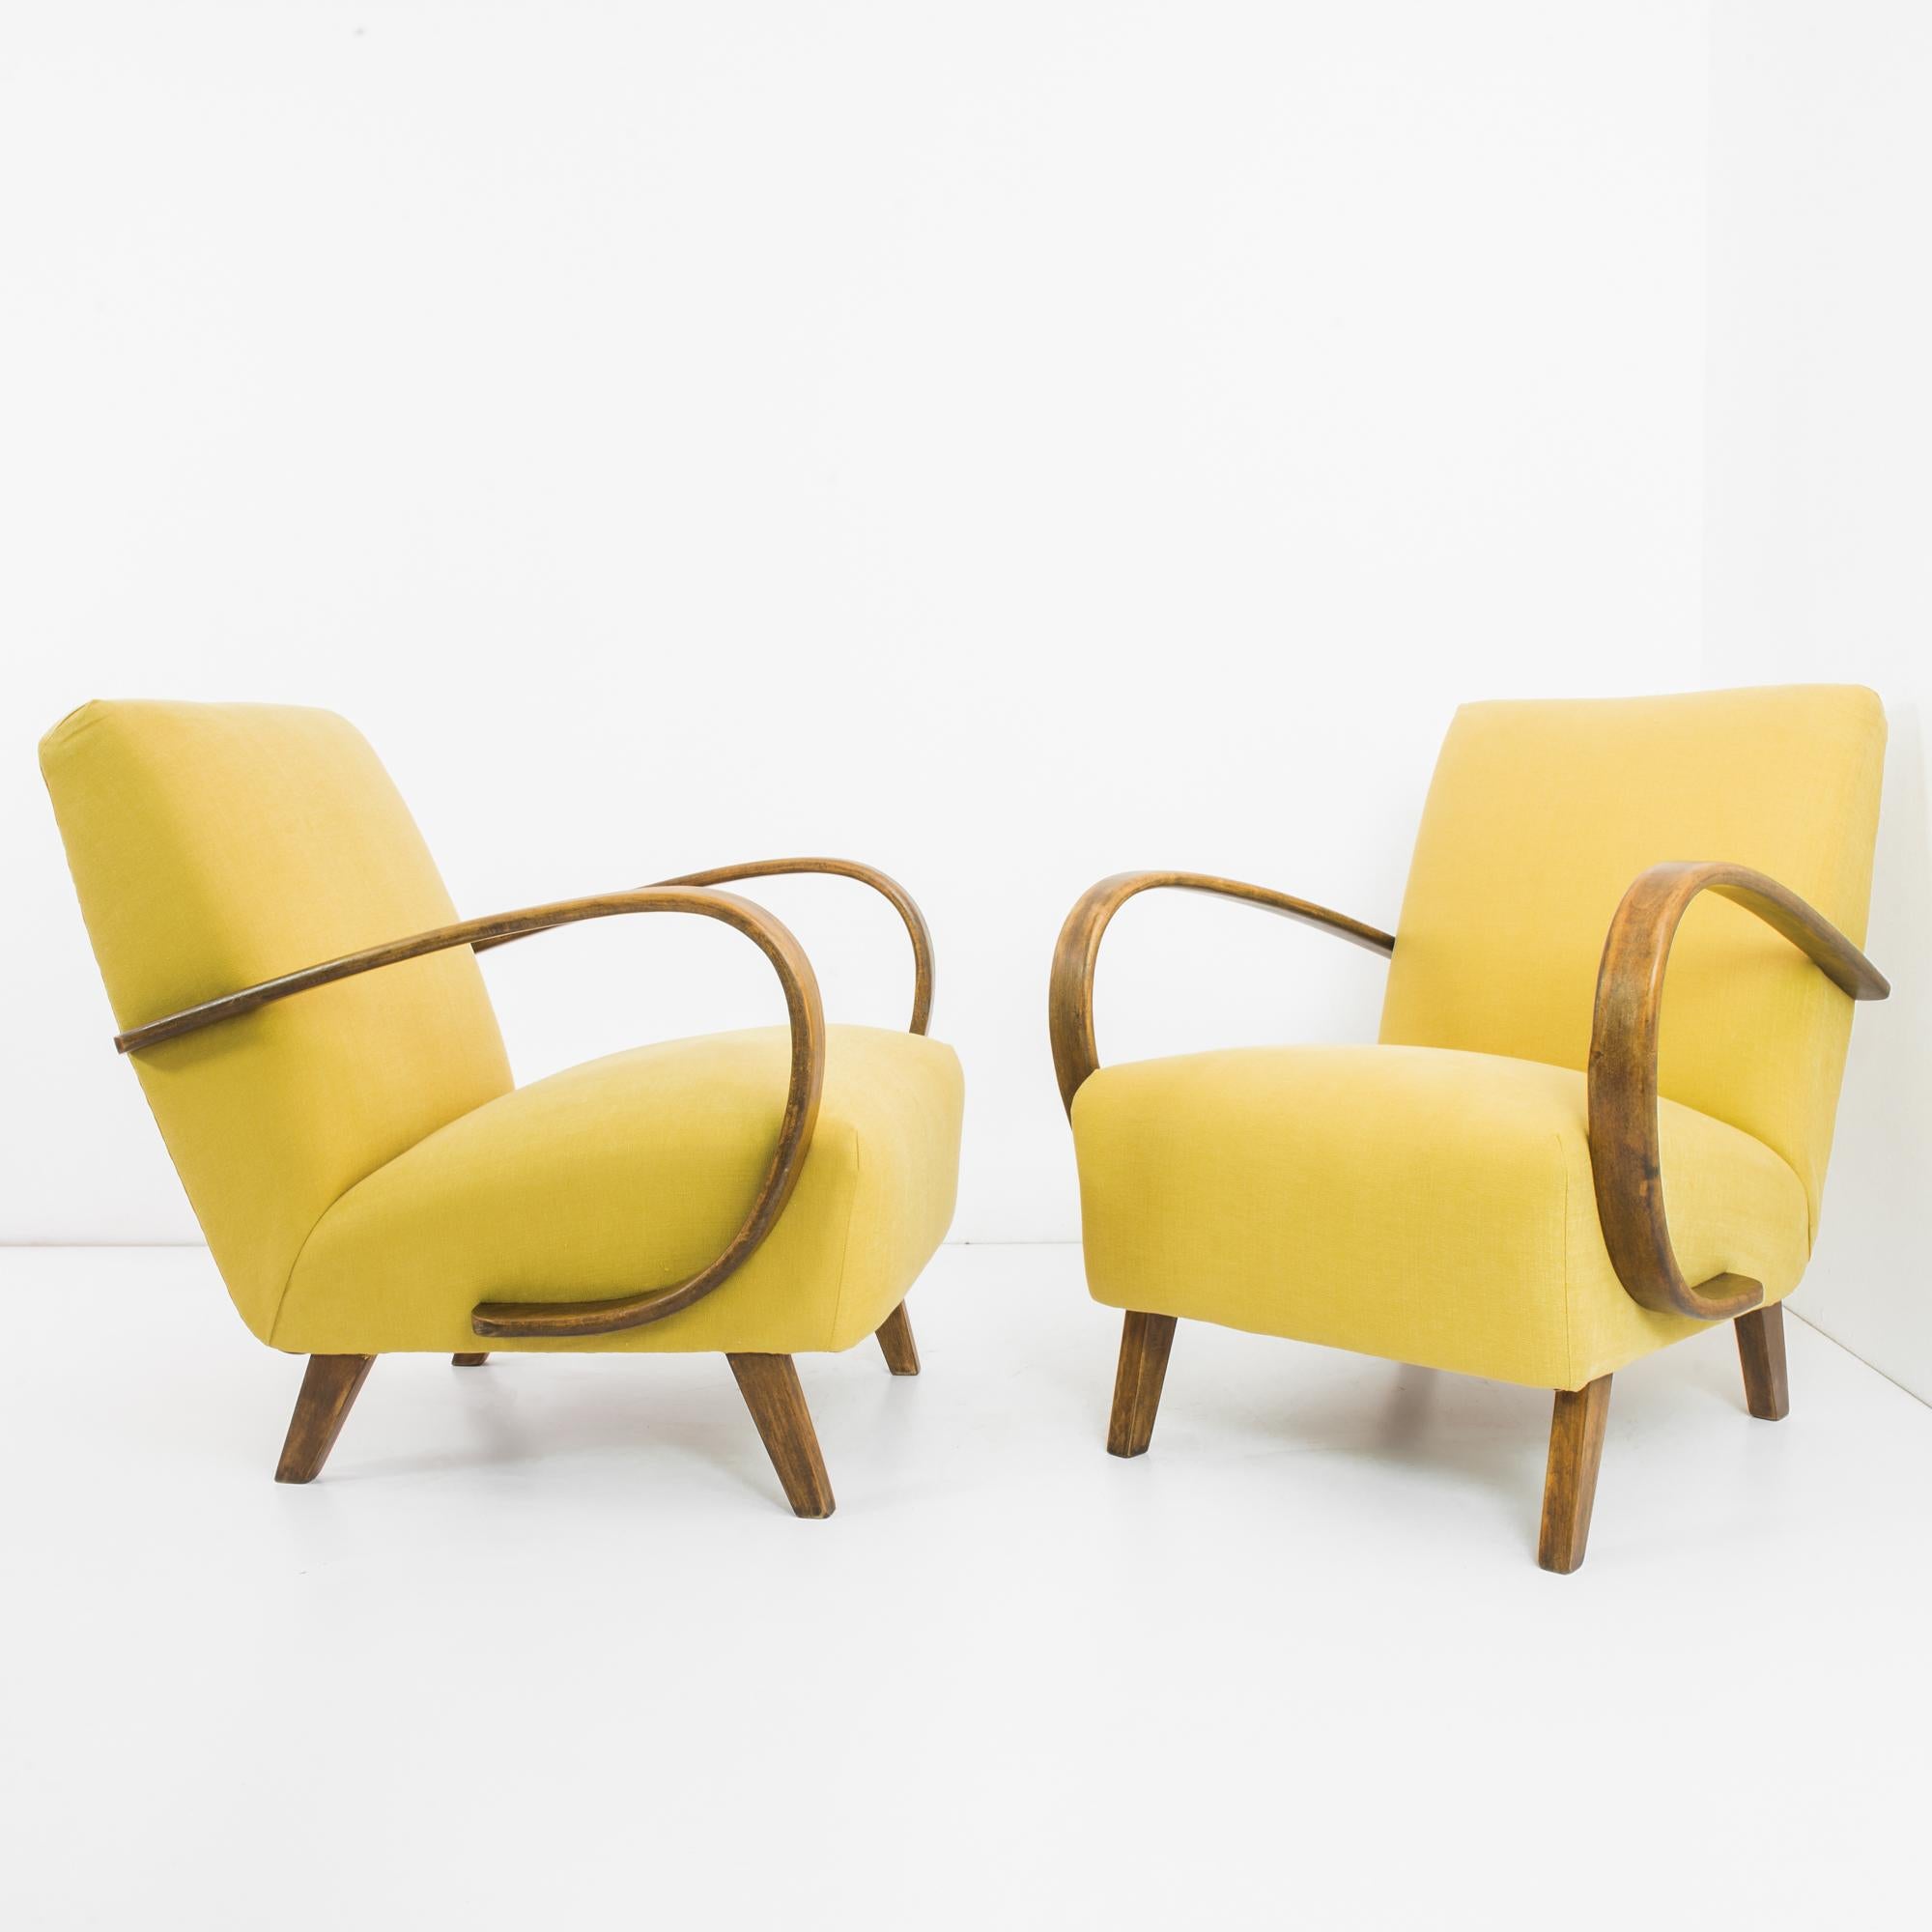 A pair of 1960s armchairs by Czech furniture designer J. Halabala. A low-set, reclined silhouette, upholstered in a lemon yellow fabric. The deep cushioned seat is braced by the distinctive sweep of the polished bentwood armrests. The form is